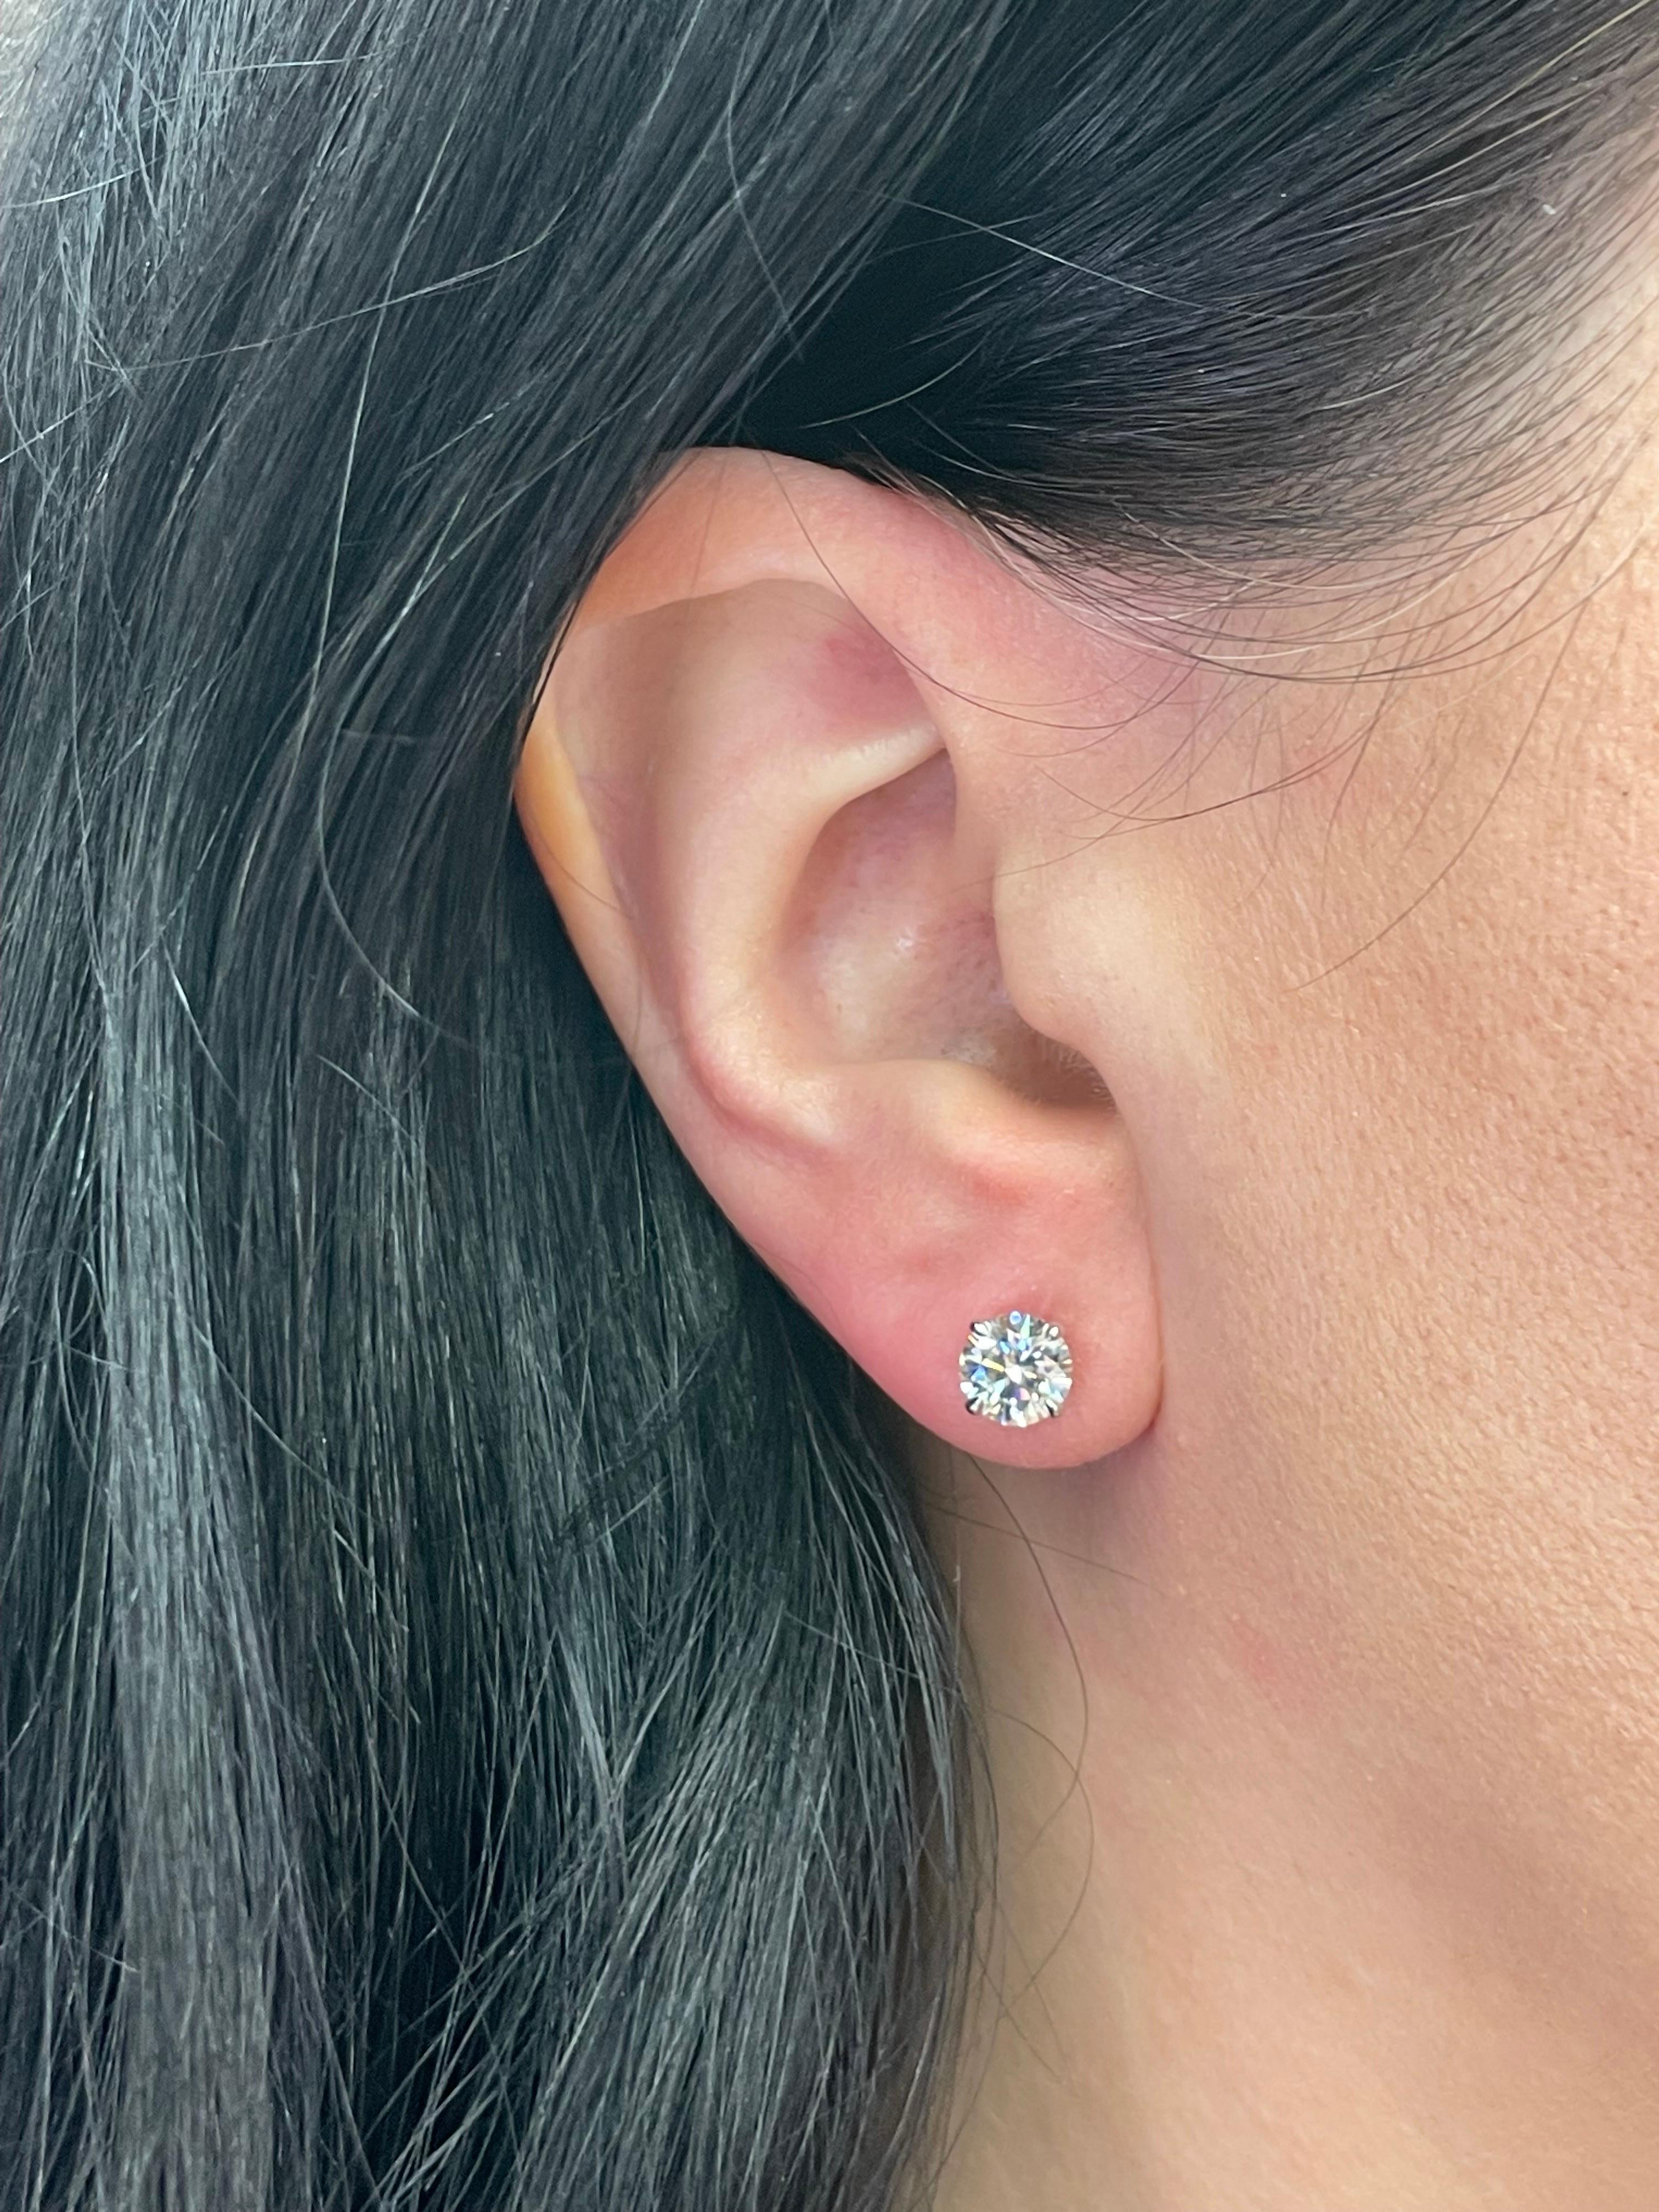 GIA Certified Diamond stud earrings weighing 1.81 Carats, in 18 Karat White Gold 4 Prong Champagne Setting.
Color J-K
Clarity SI1-SI2
Full of Life!

Setting can be changed to a Basket, Martini or Champagne/ 3 or 4 Prong/ 14 or 18 Karat.

DM for more